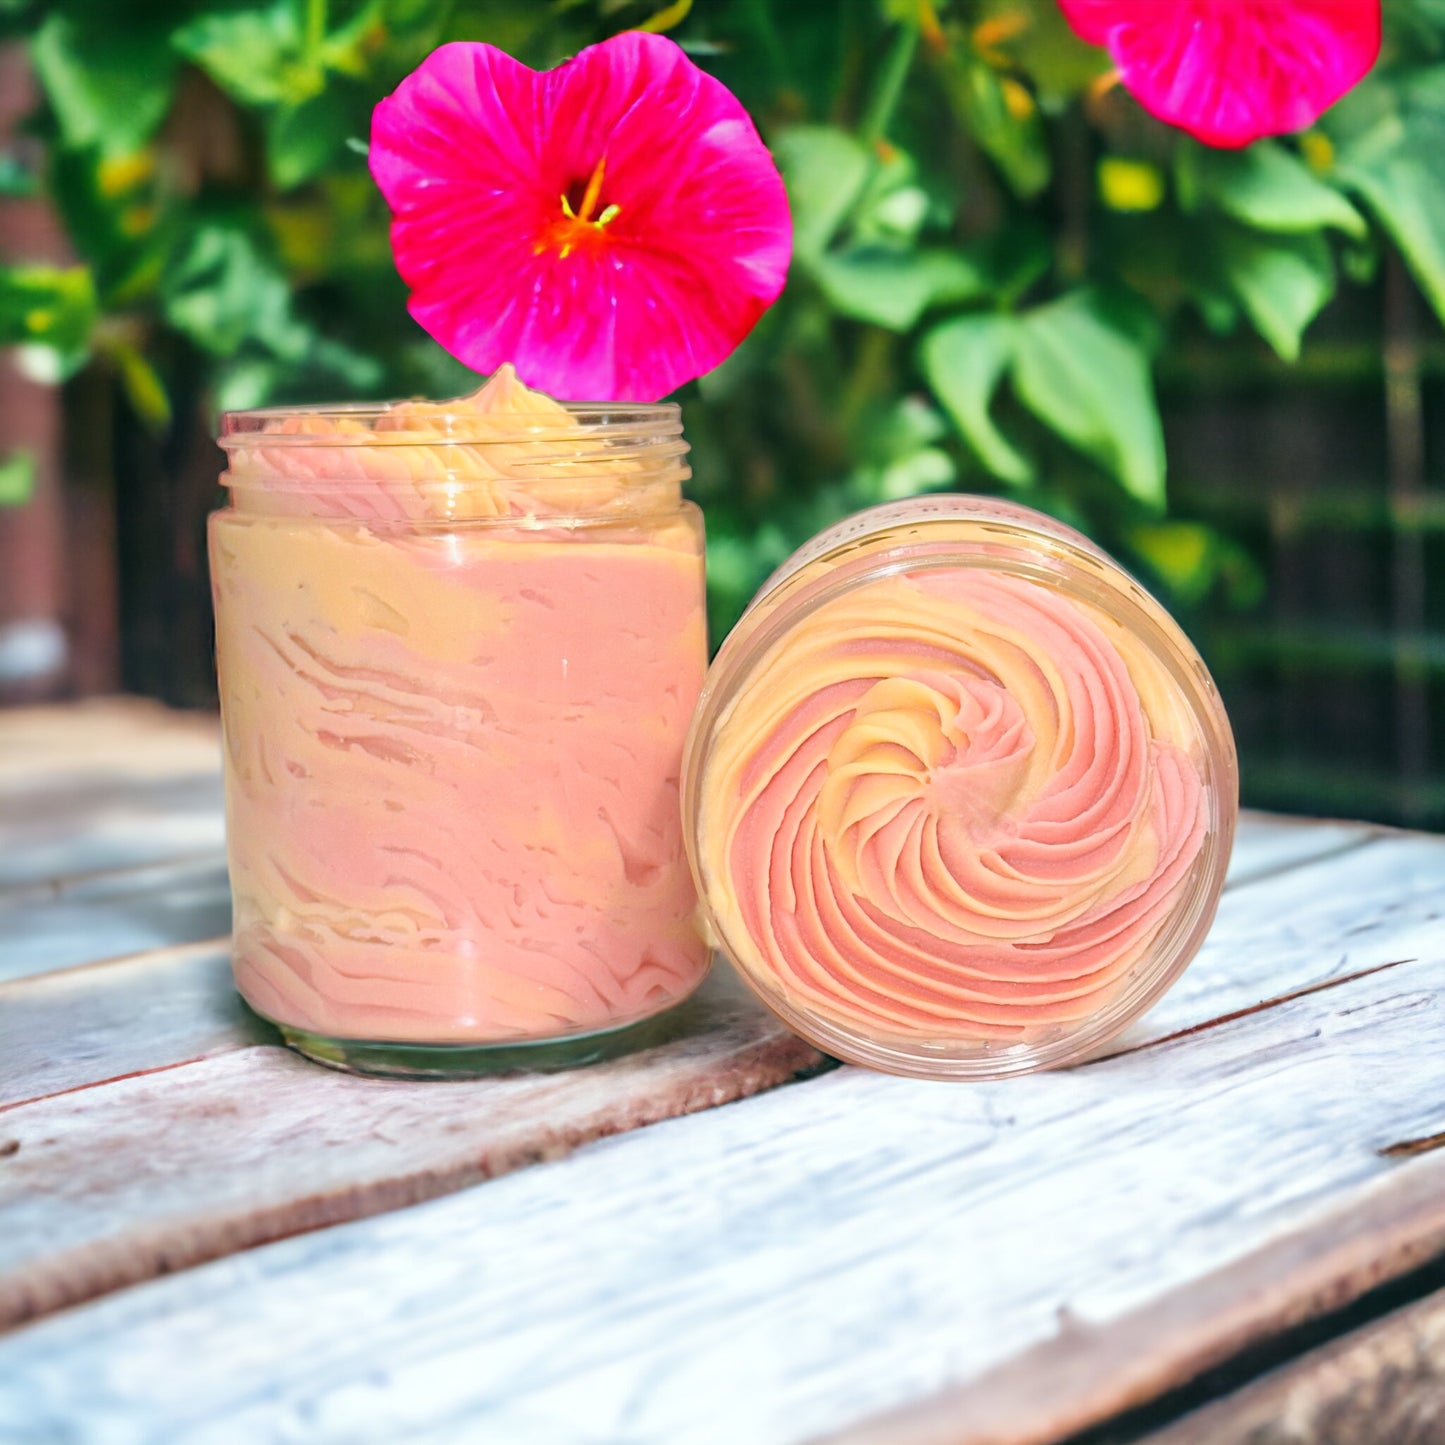 White Peach 🍑 & Hibiscus 🌺 Whipped Body Butter